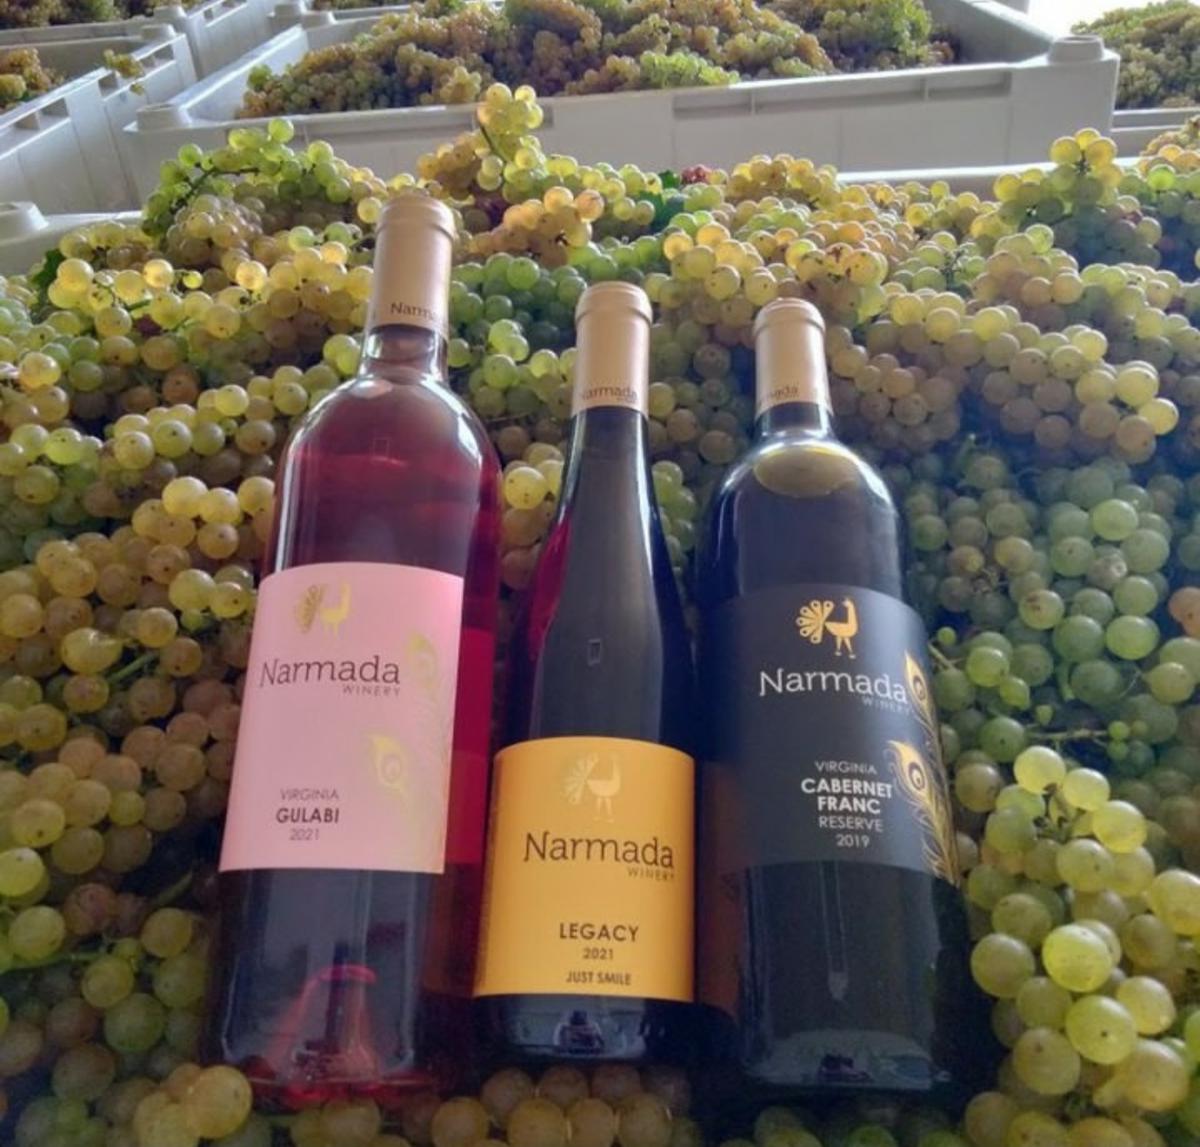 A selection of wines from Narmada